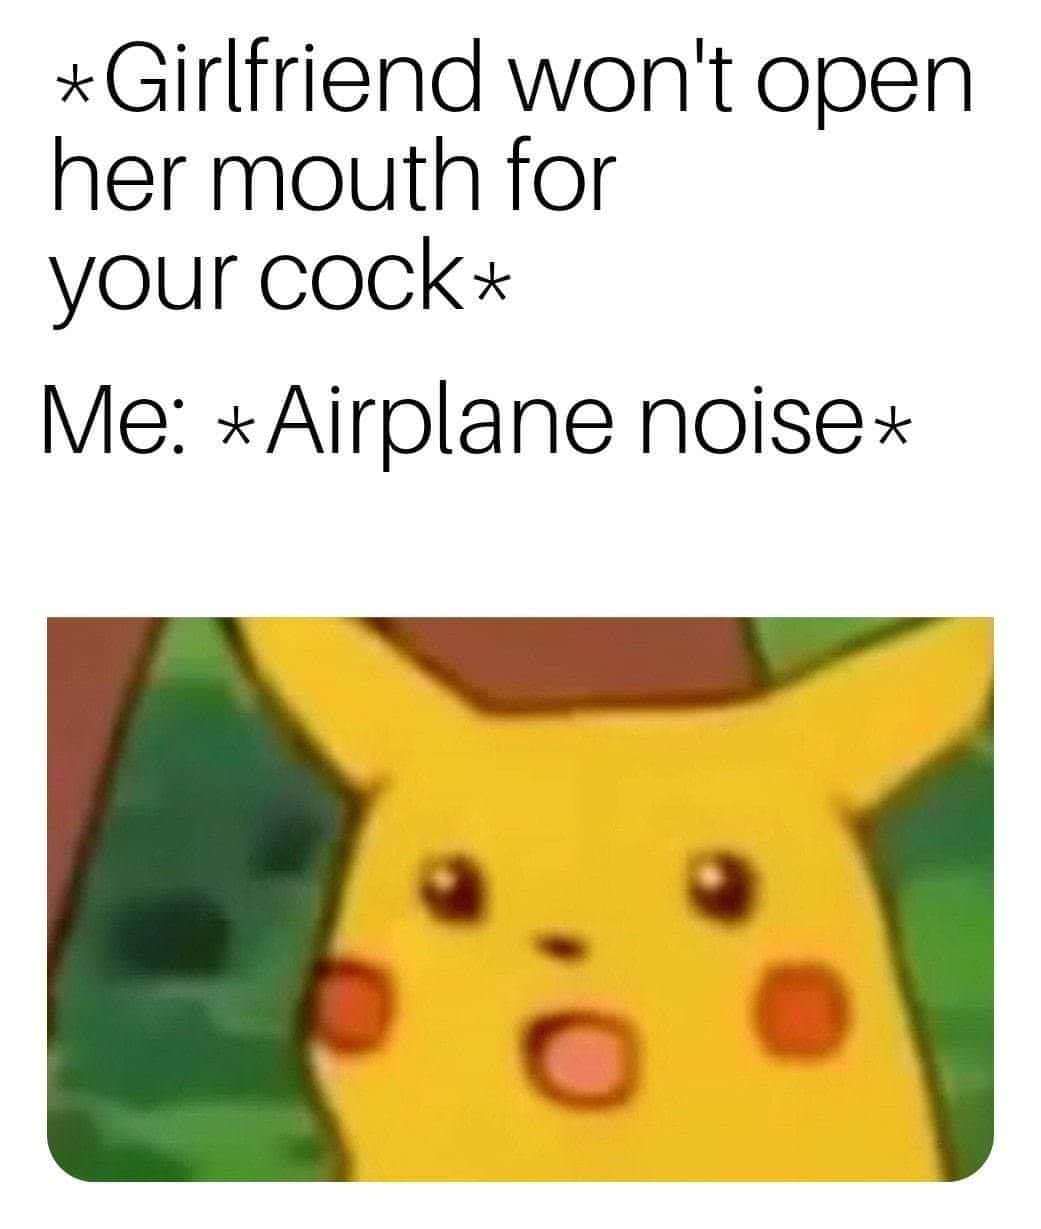 memes surprised pikachu - Girlfriend won't open her mouth for your cock Me Airplane noisex